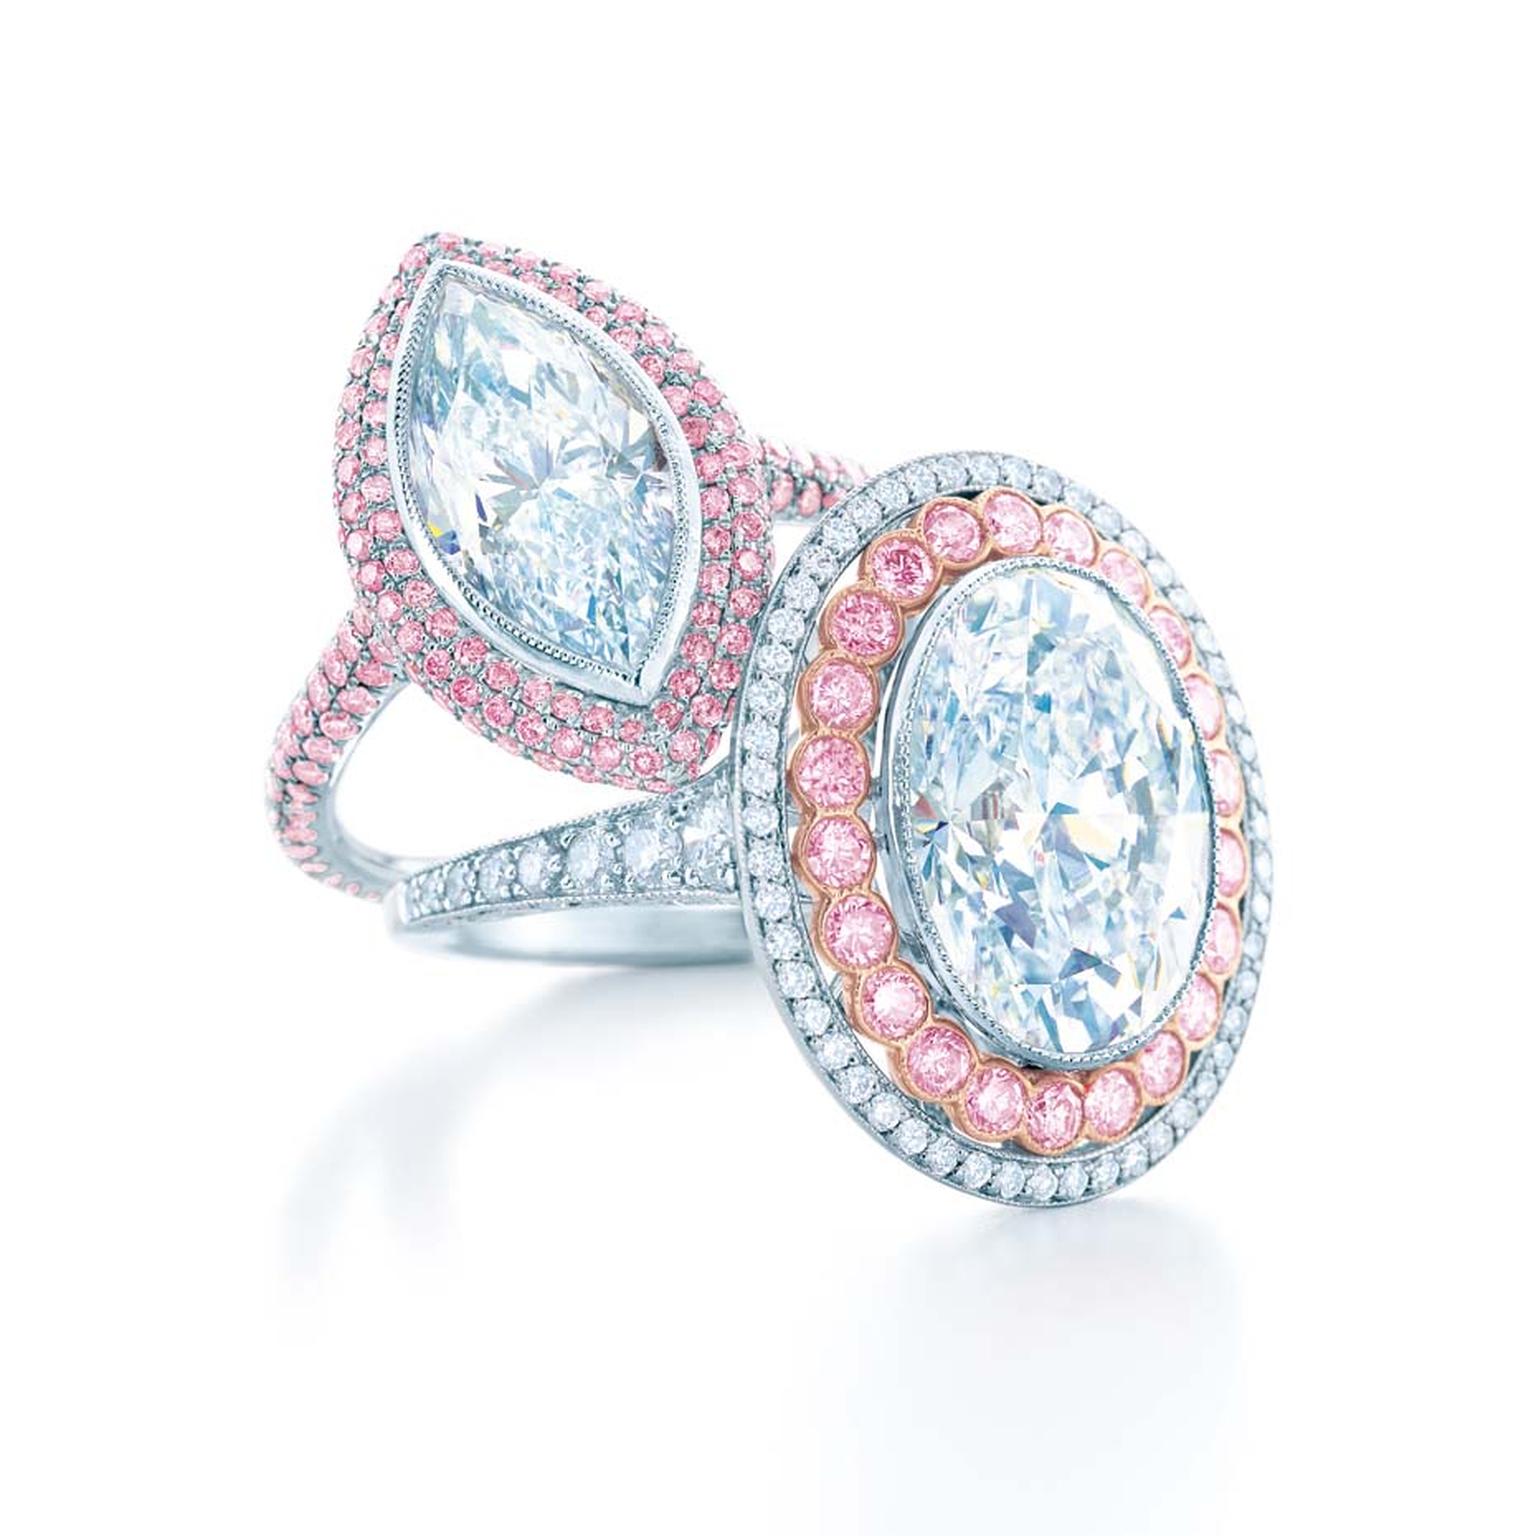 Tiffany and Co. 2014 Blue Book diamond rings. The ring on the left in platinum is set with a 3.04ct internally flawless marquise diamond and pink diamonds; the ring on the right in platinum and rose gold with a 6.00ct oval diamond with pink and white diam